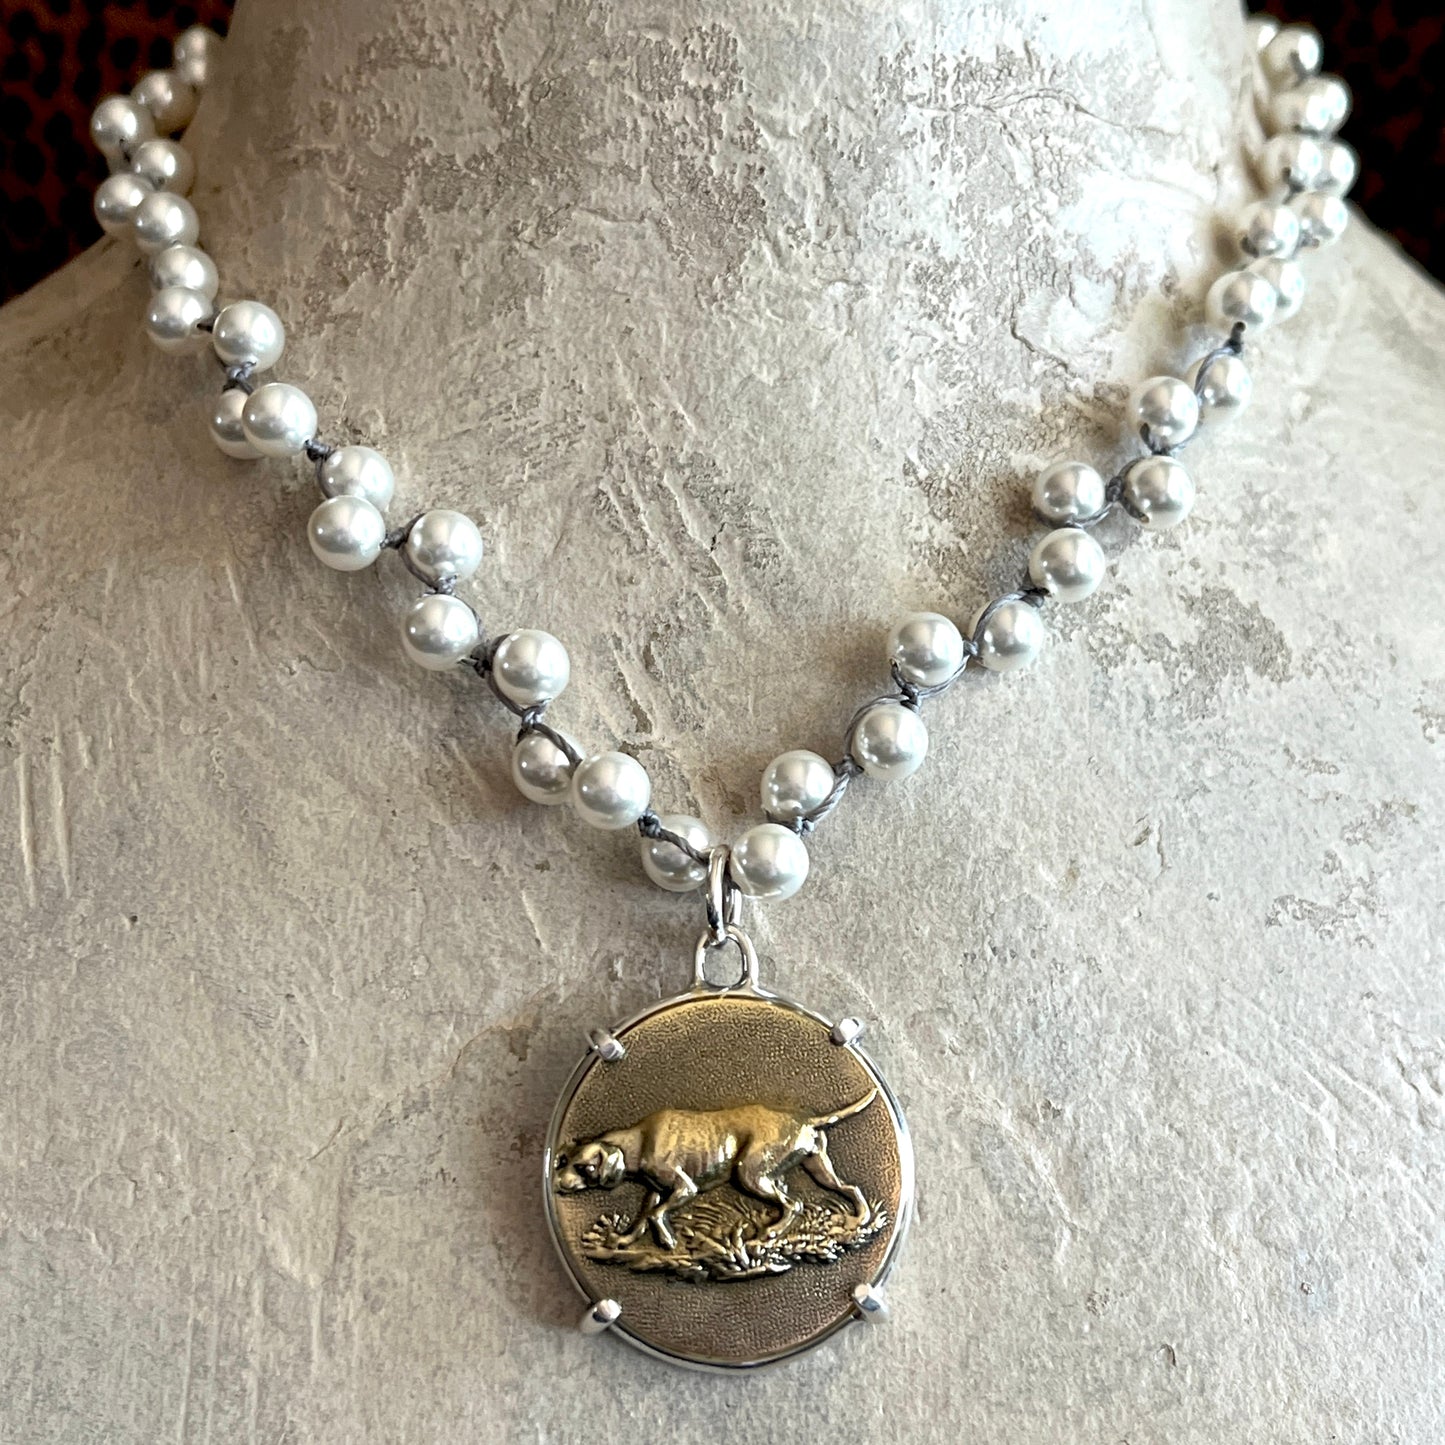 Hunting Hound Dog Button Necklace